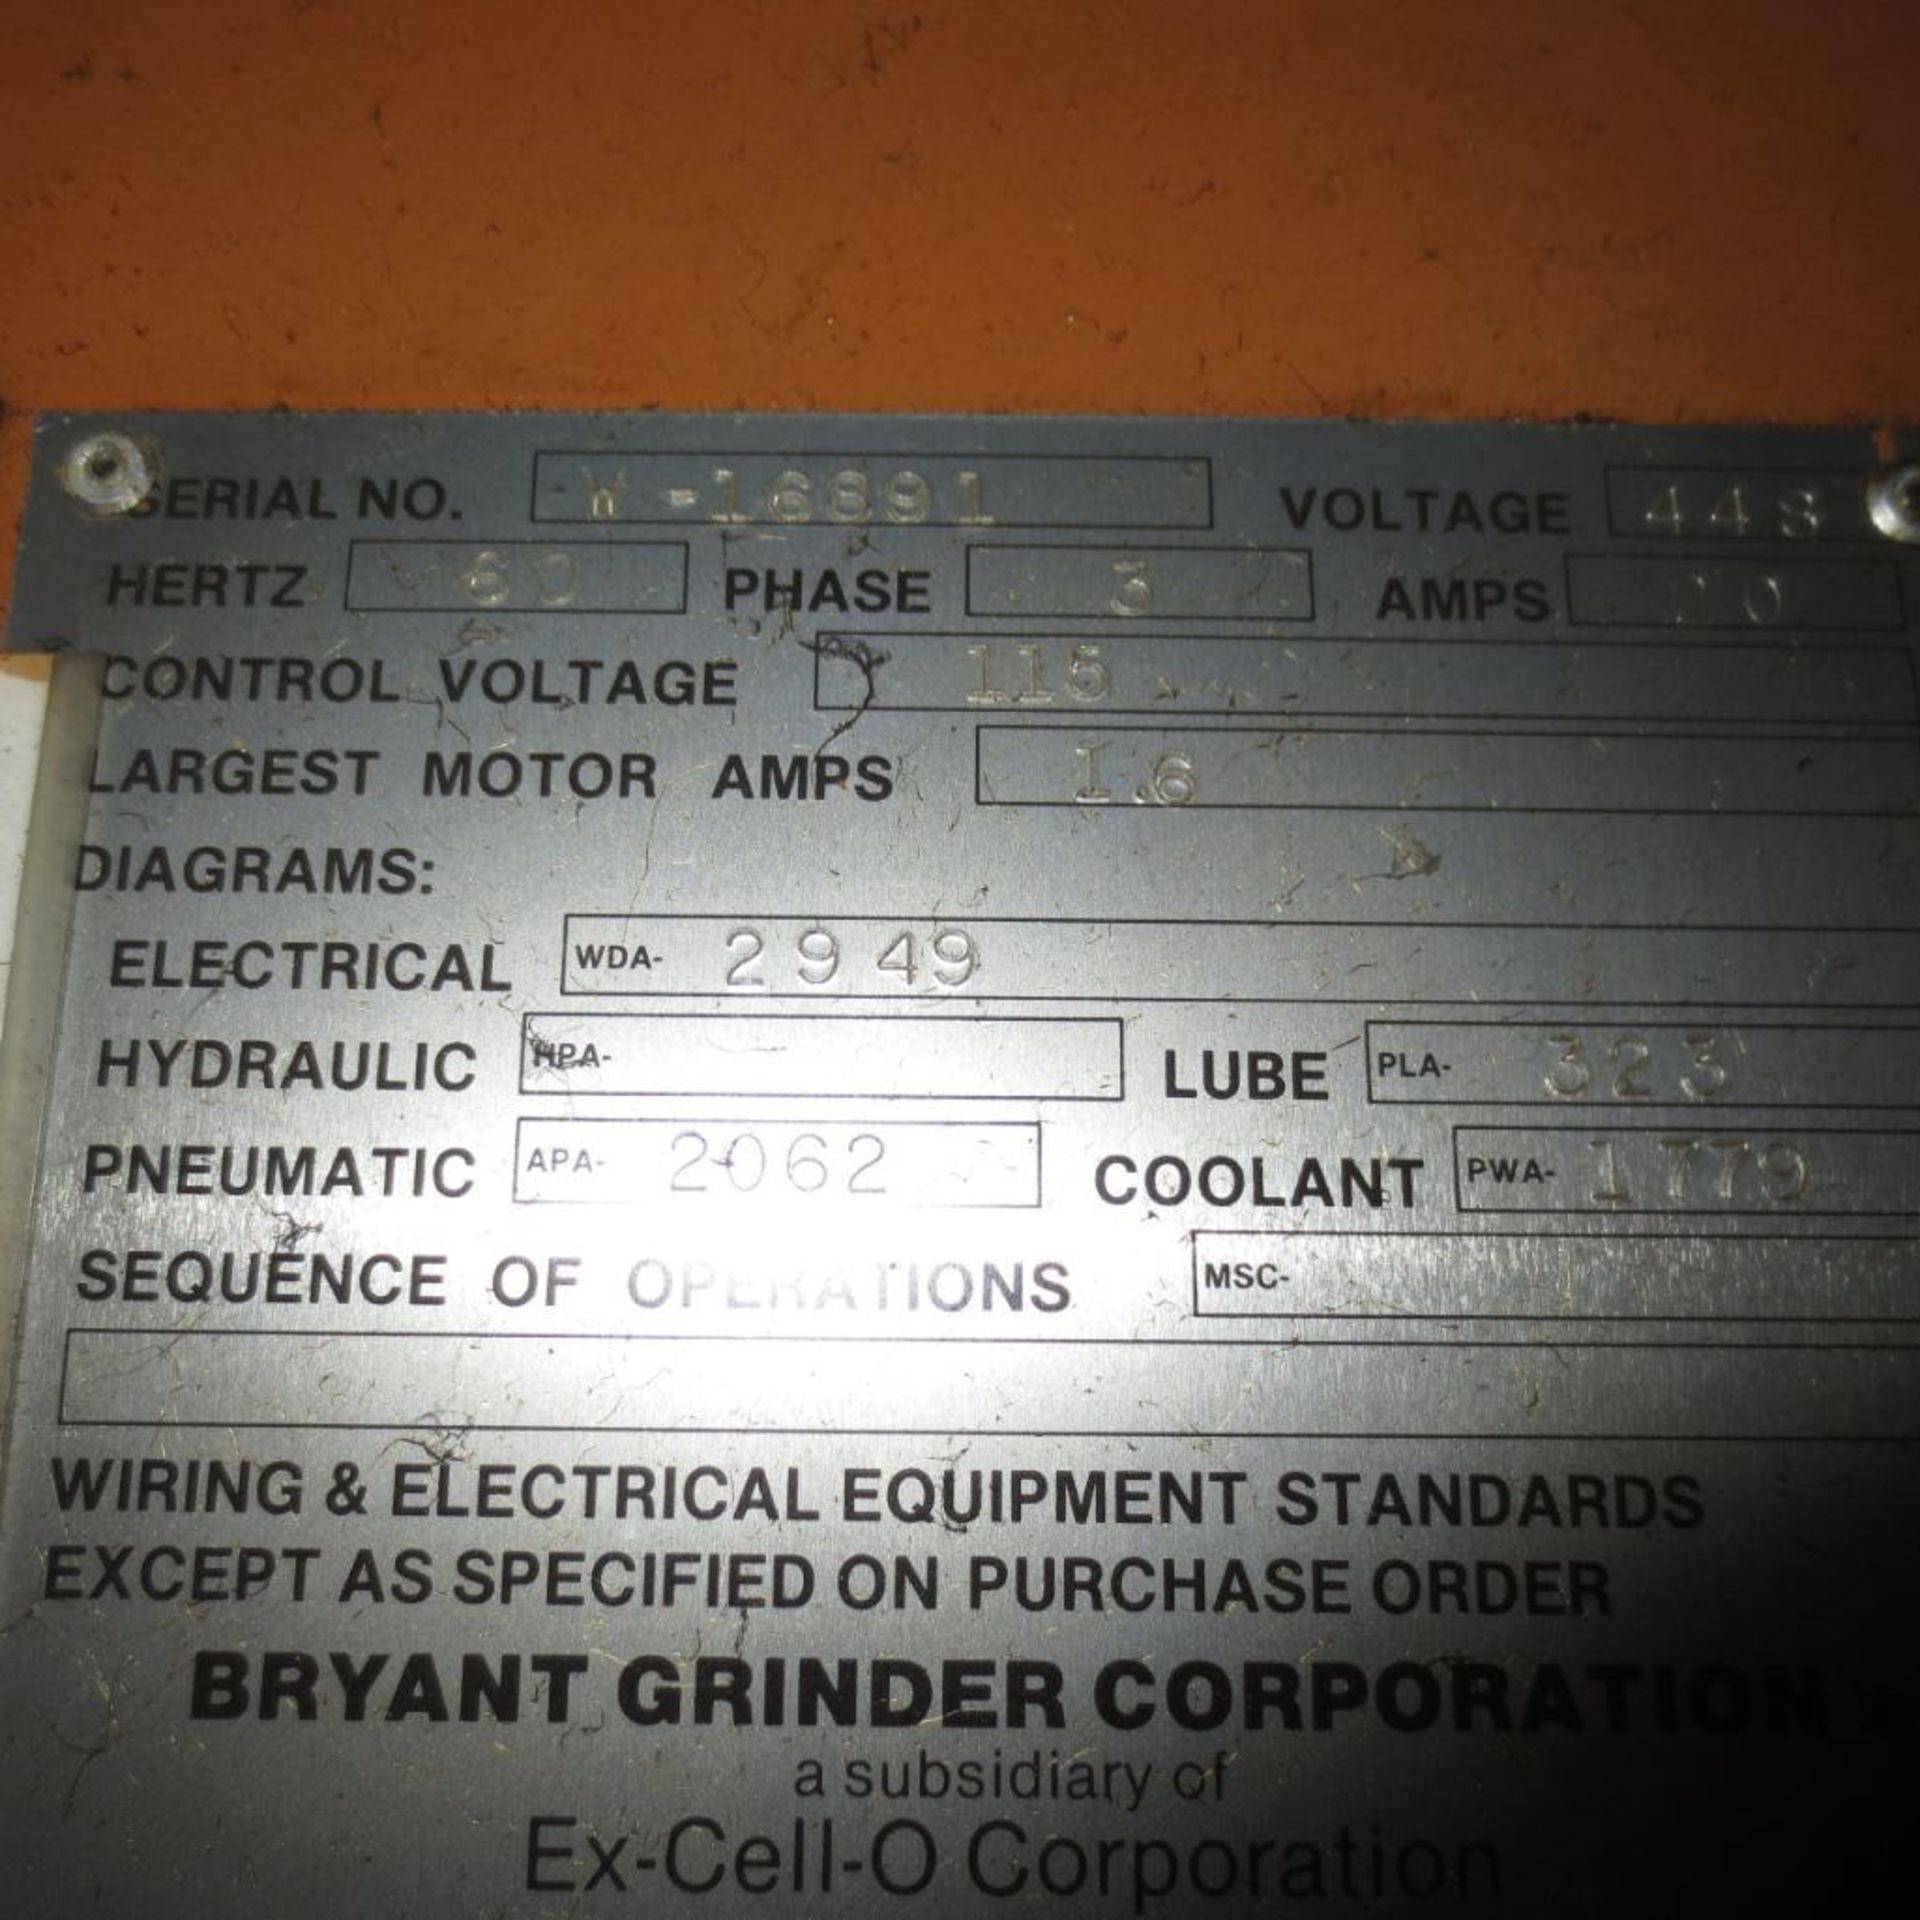 Bryant EX-Cell-0 LL1 CNC Grinder, S/N W-16891. Loading Fee is $350.00 - Image 12 of 12